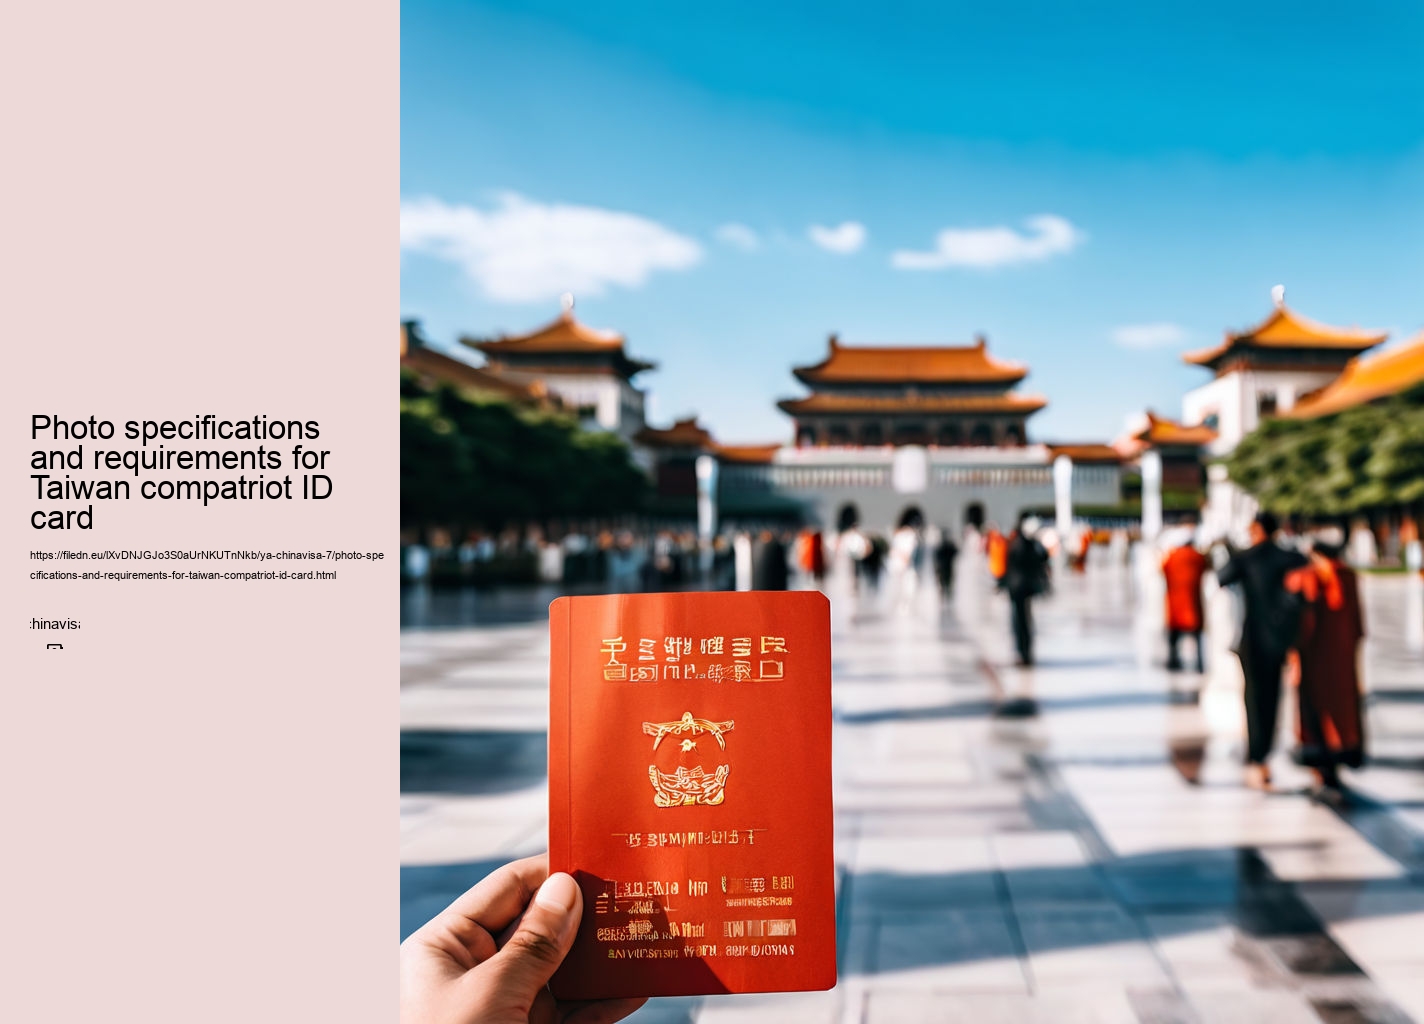 Photo specifications and requirements for Taiwan compatriot ID card